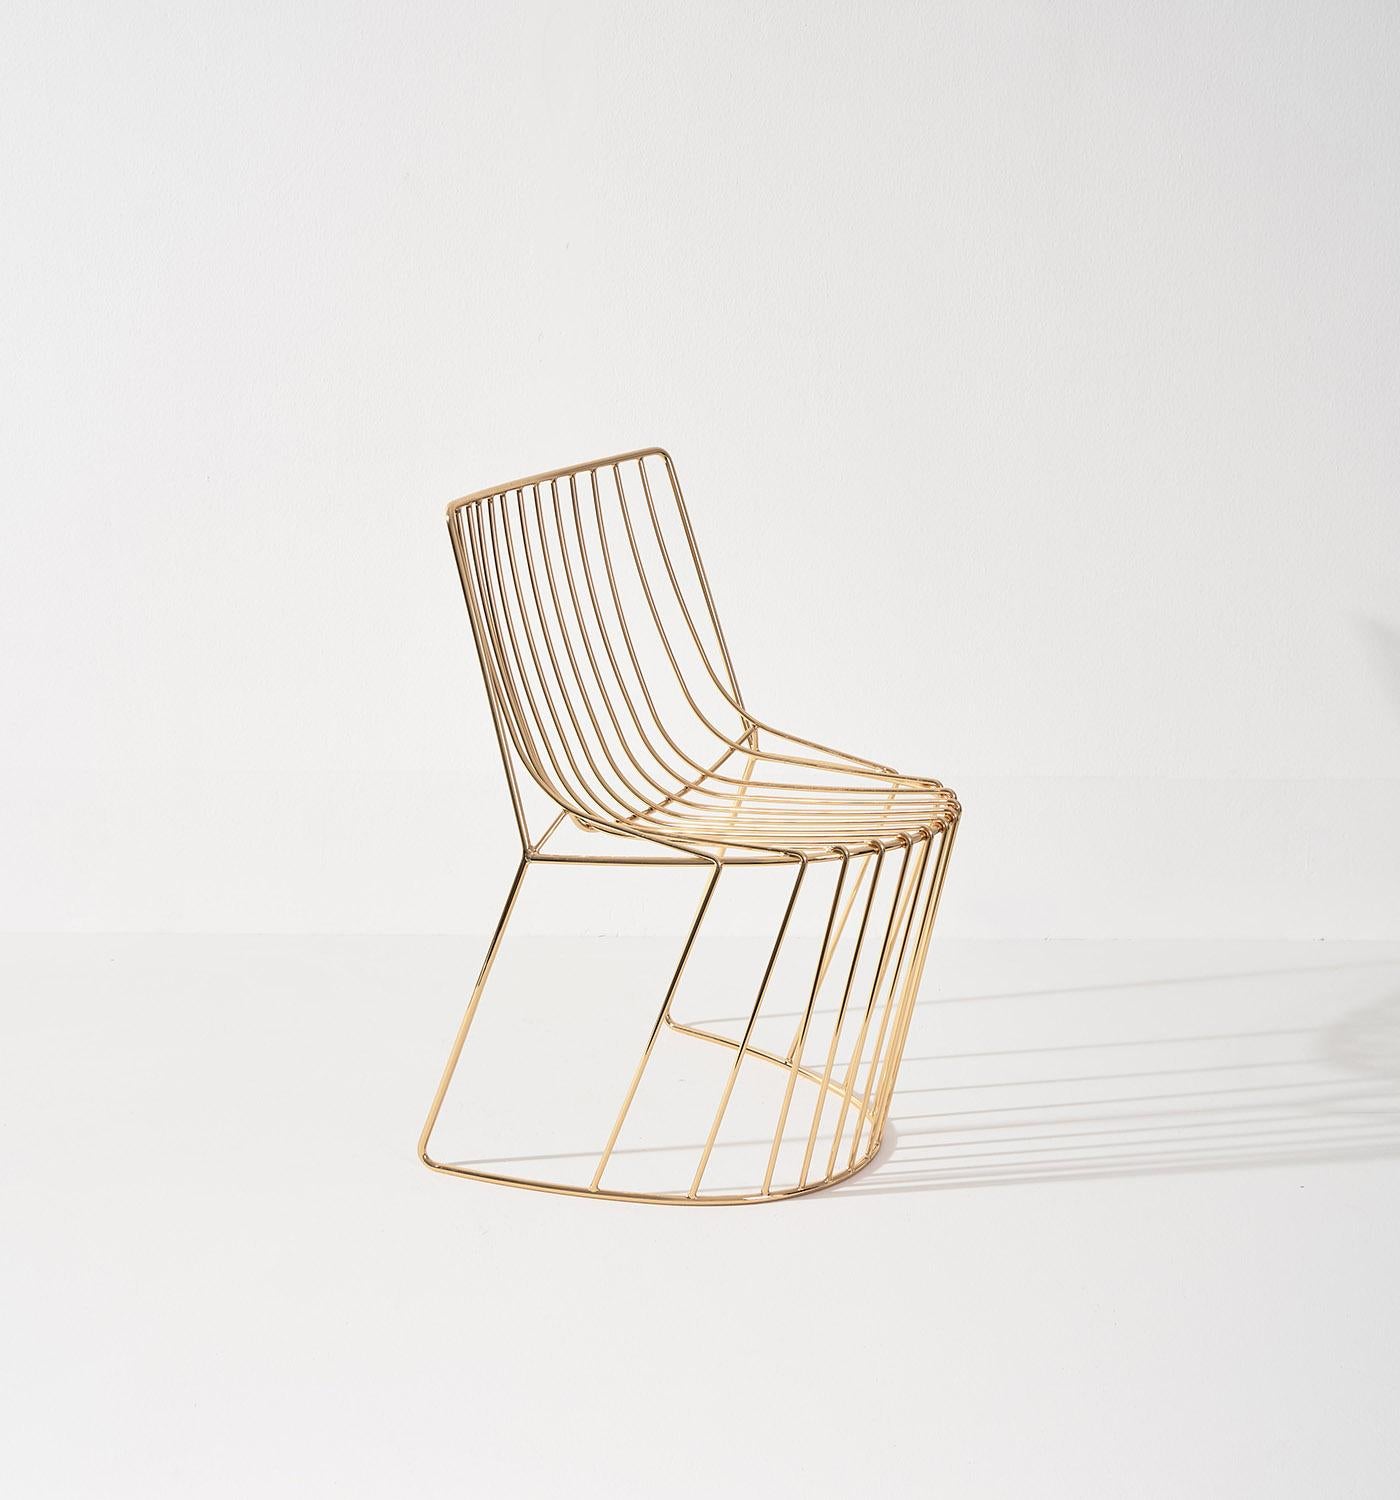 Precious and conceptual seat where two opposing ideals of surfaces are dashed by a sequence of wires carefully shaped to be comfortable.
Amarone chair, design by Enrico Girotti, is the icon of the wire design collection of lapiegaWD that is